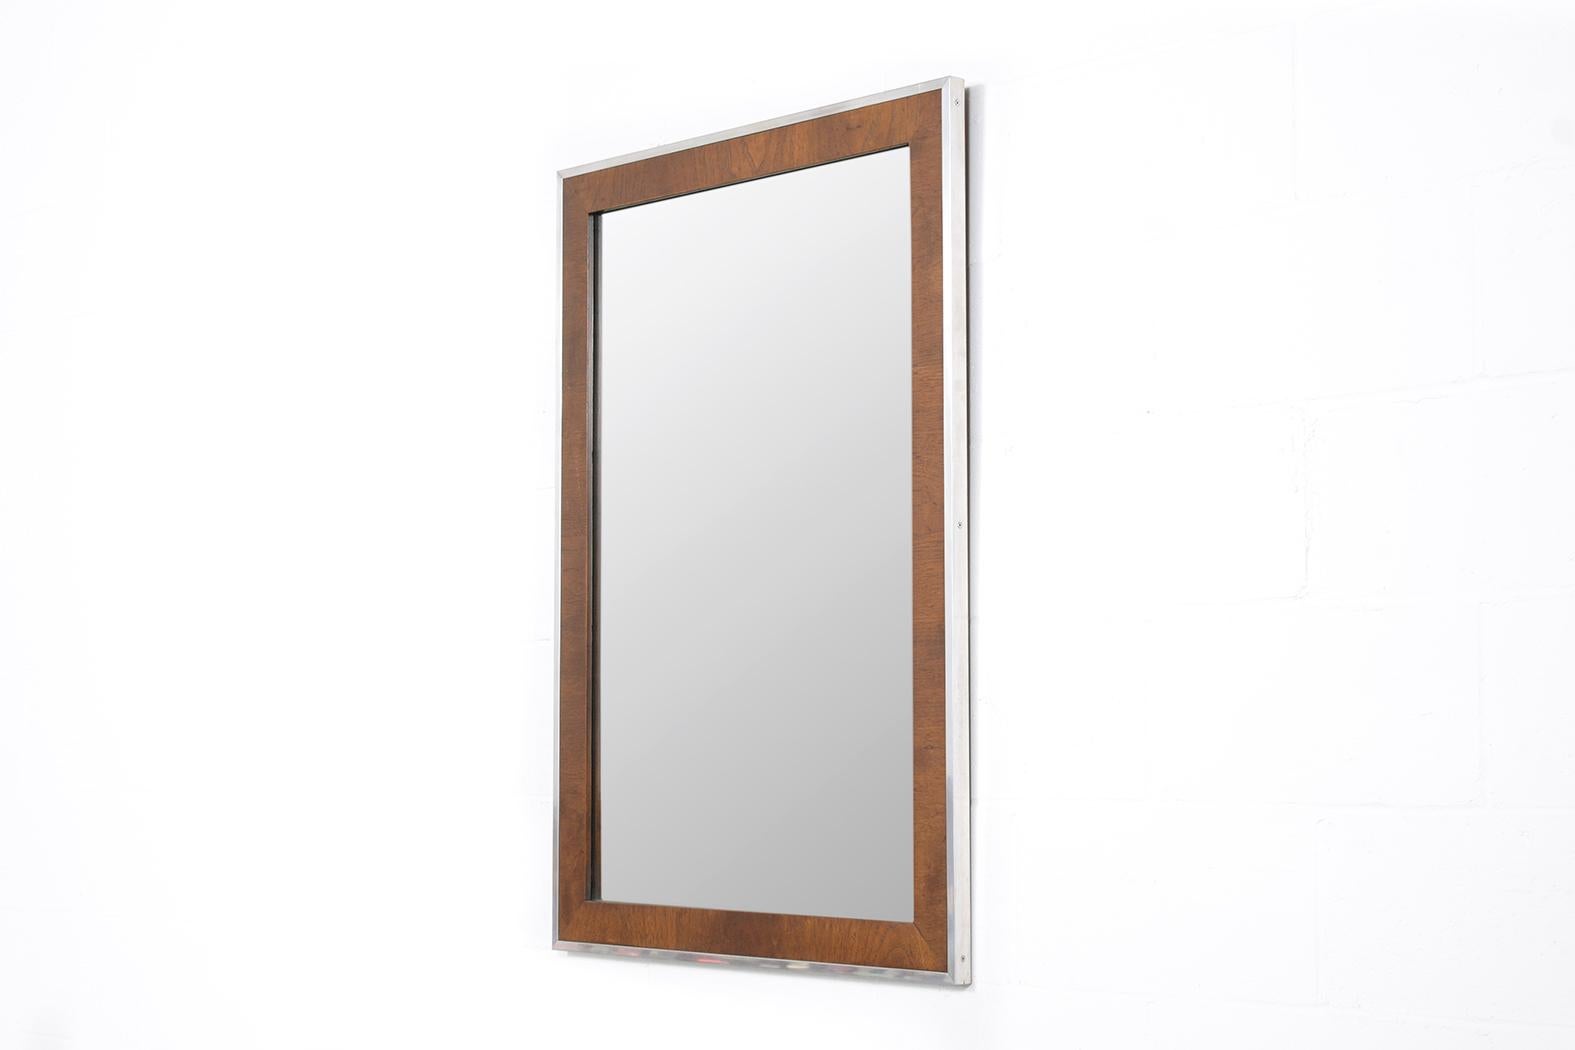 This exceptional vintage Mid-Century Modern wall mirror, expertly crafted from a combination of walnut and aluminum, is presented in great condition and has been meticulously restored by our professional craftsmen. Dating back to the 1960s, this